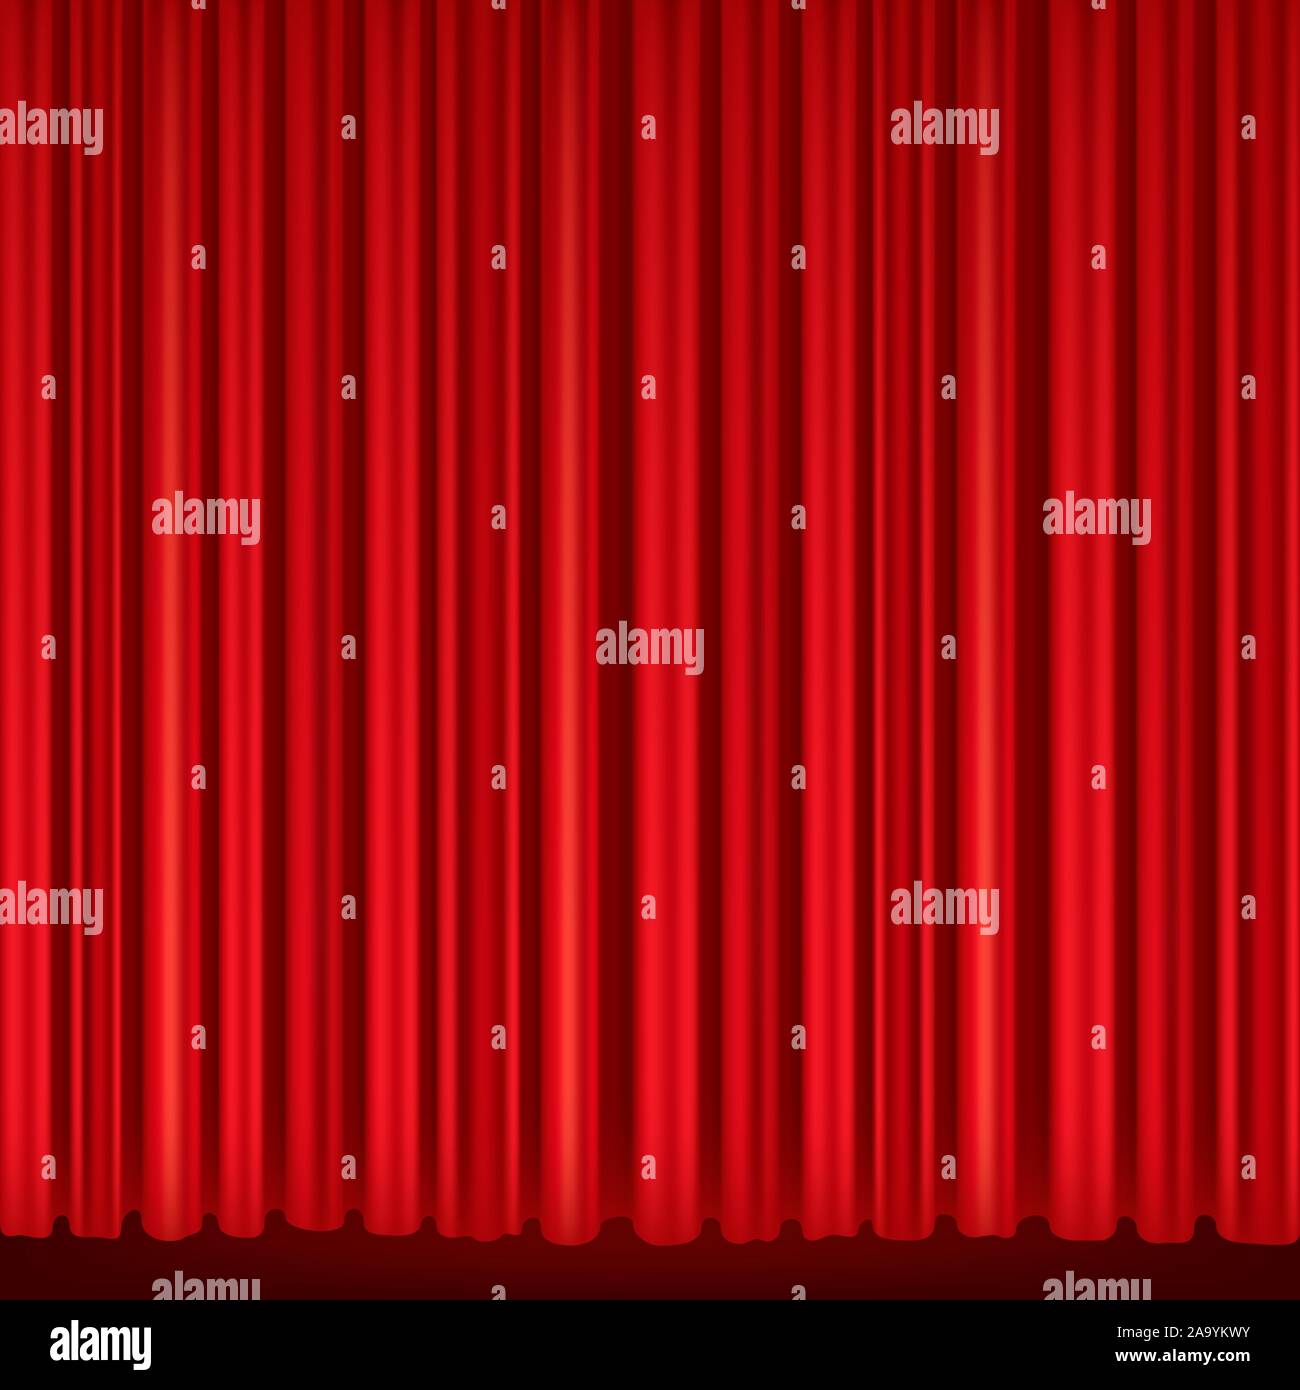 Red curtains of theater stage. Stock Vector